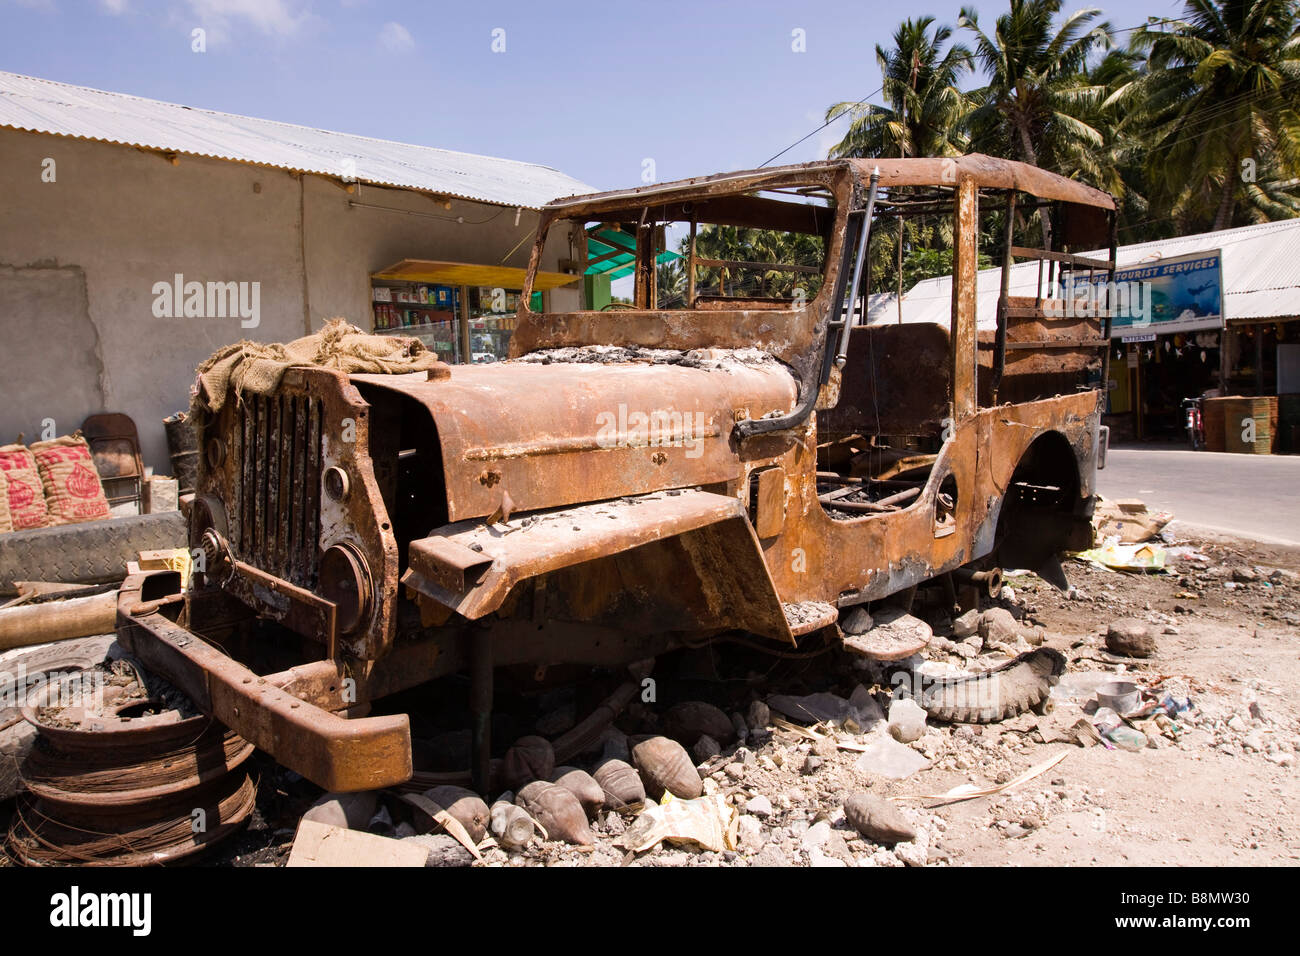 India Andaman and Nicobar Havelock island number 3 village bazaar burned out vehicle after fire Stock Photo